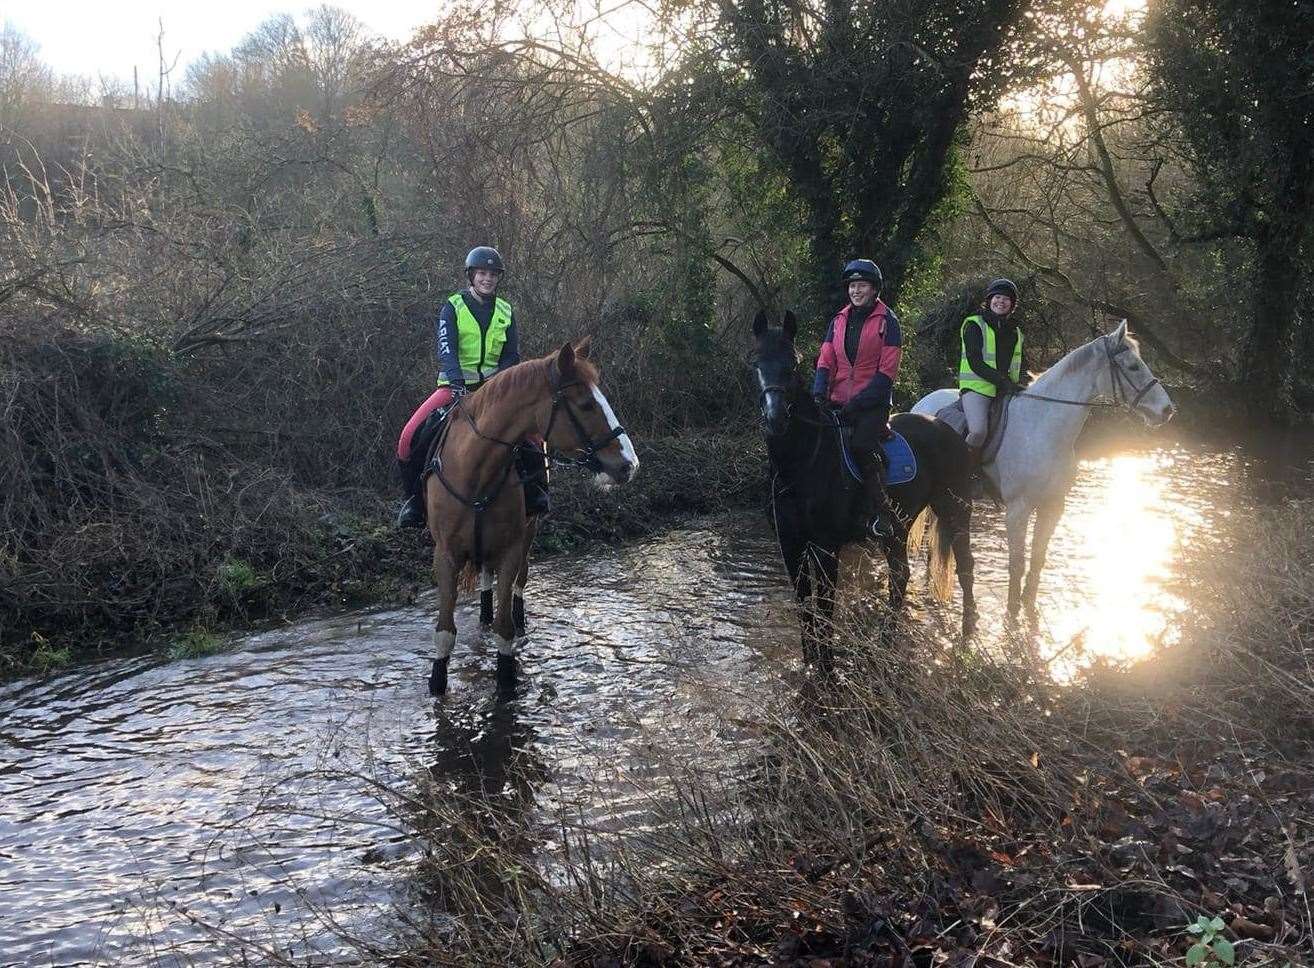 Horses and riders enjoying the river while it runs through Barham this weekend